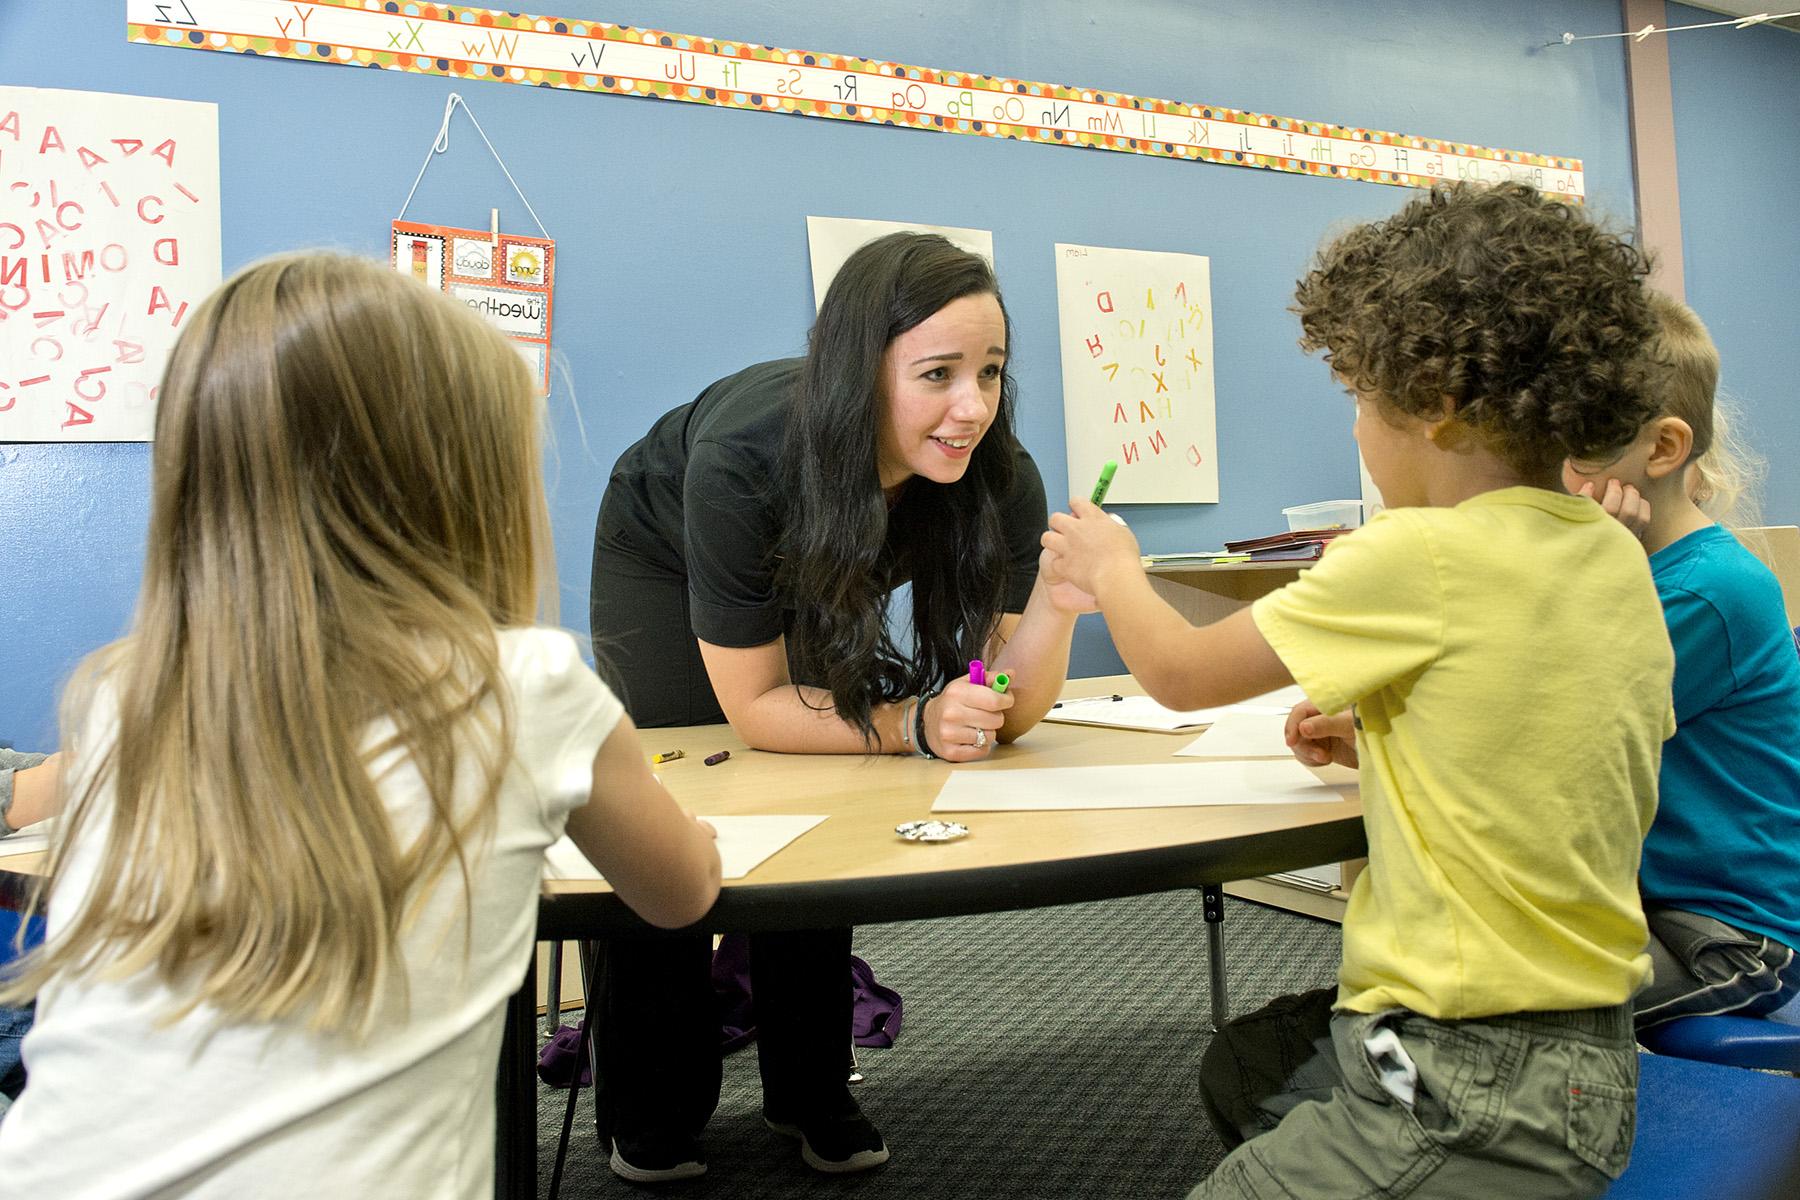 Mount Union student leans over table to assist three young children with learning activity